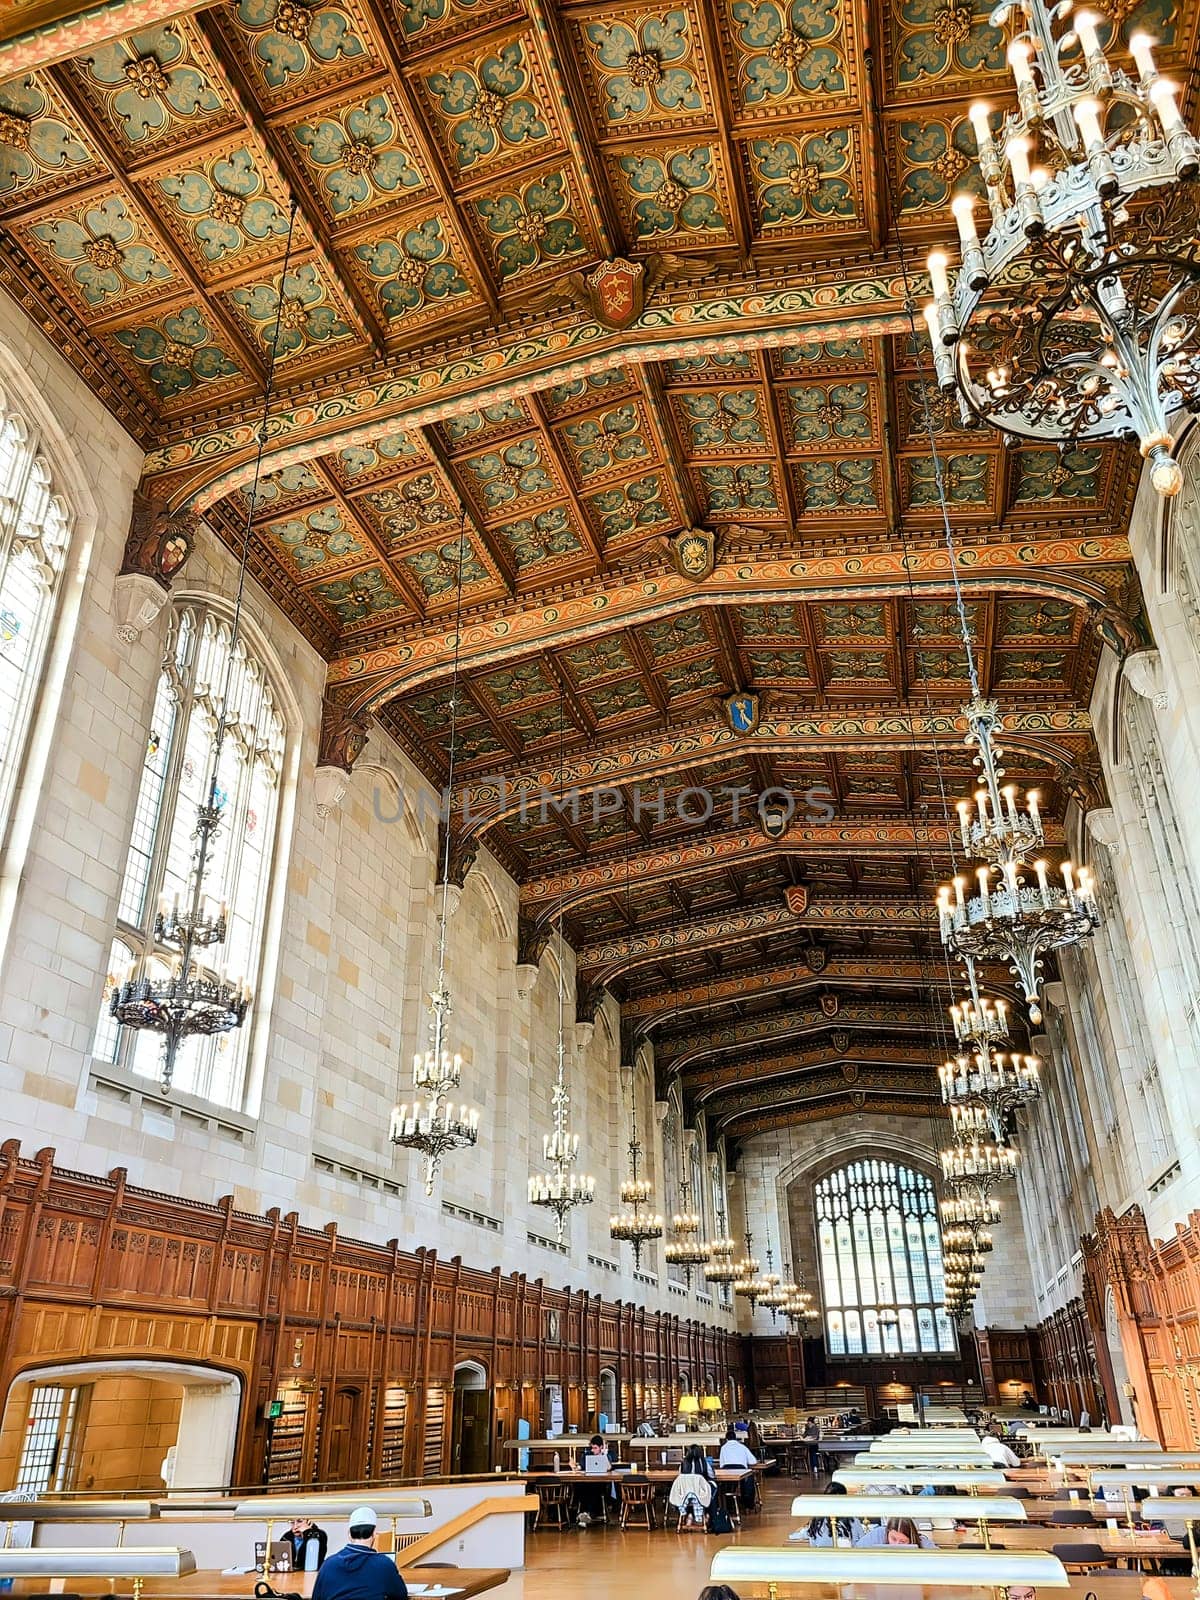 Grand Interior of University of Michigan Law Library with Ornate Ceiling and Studious Patrons